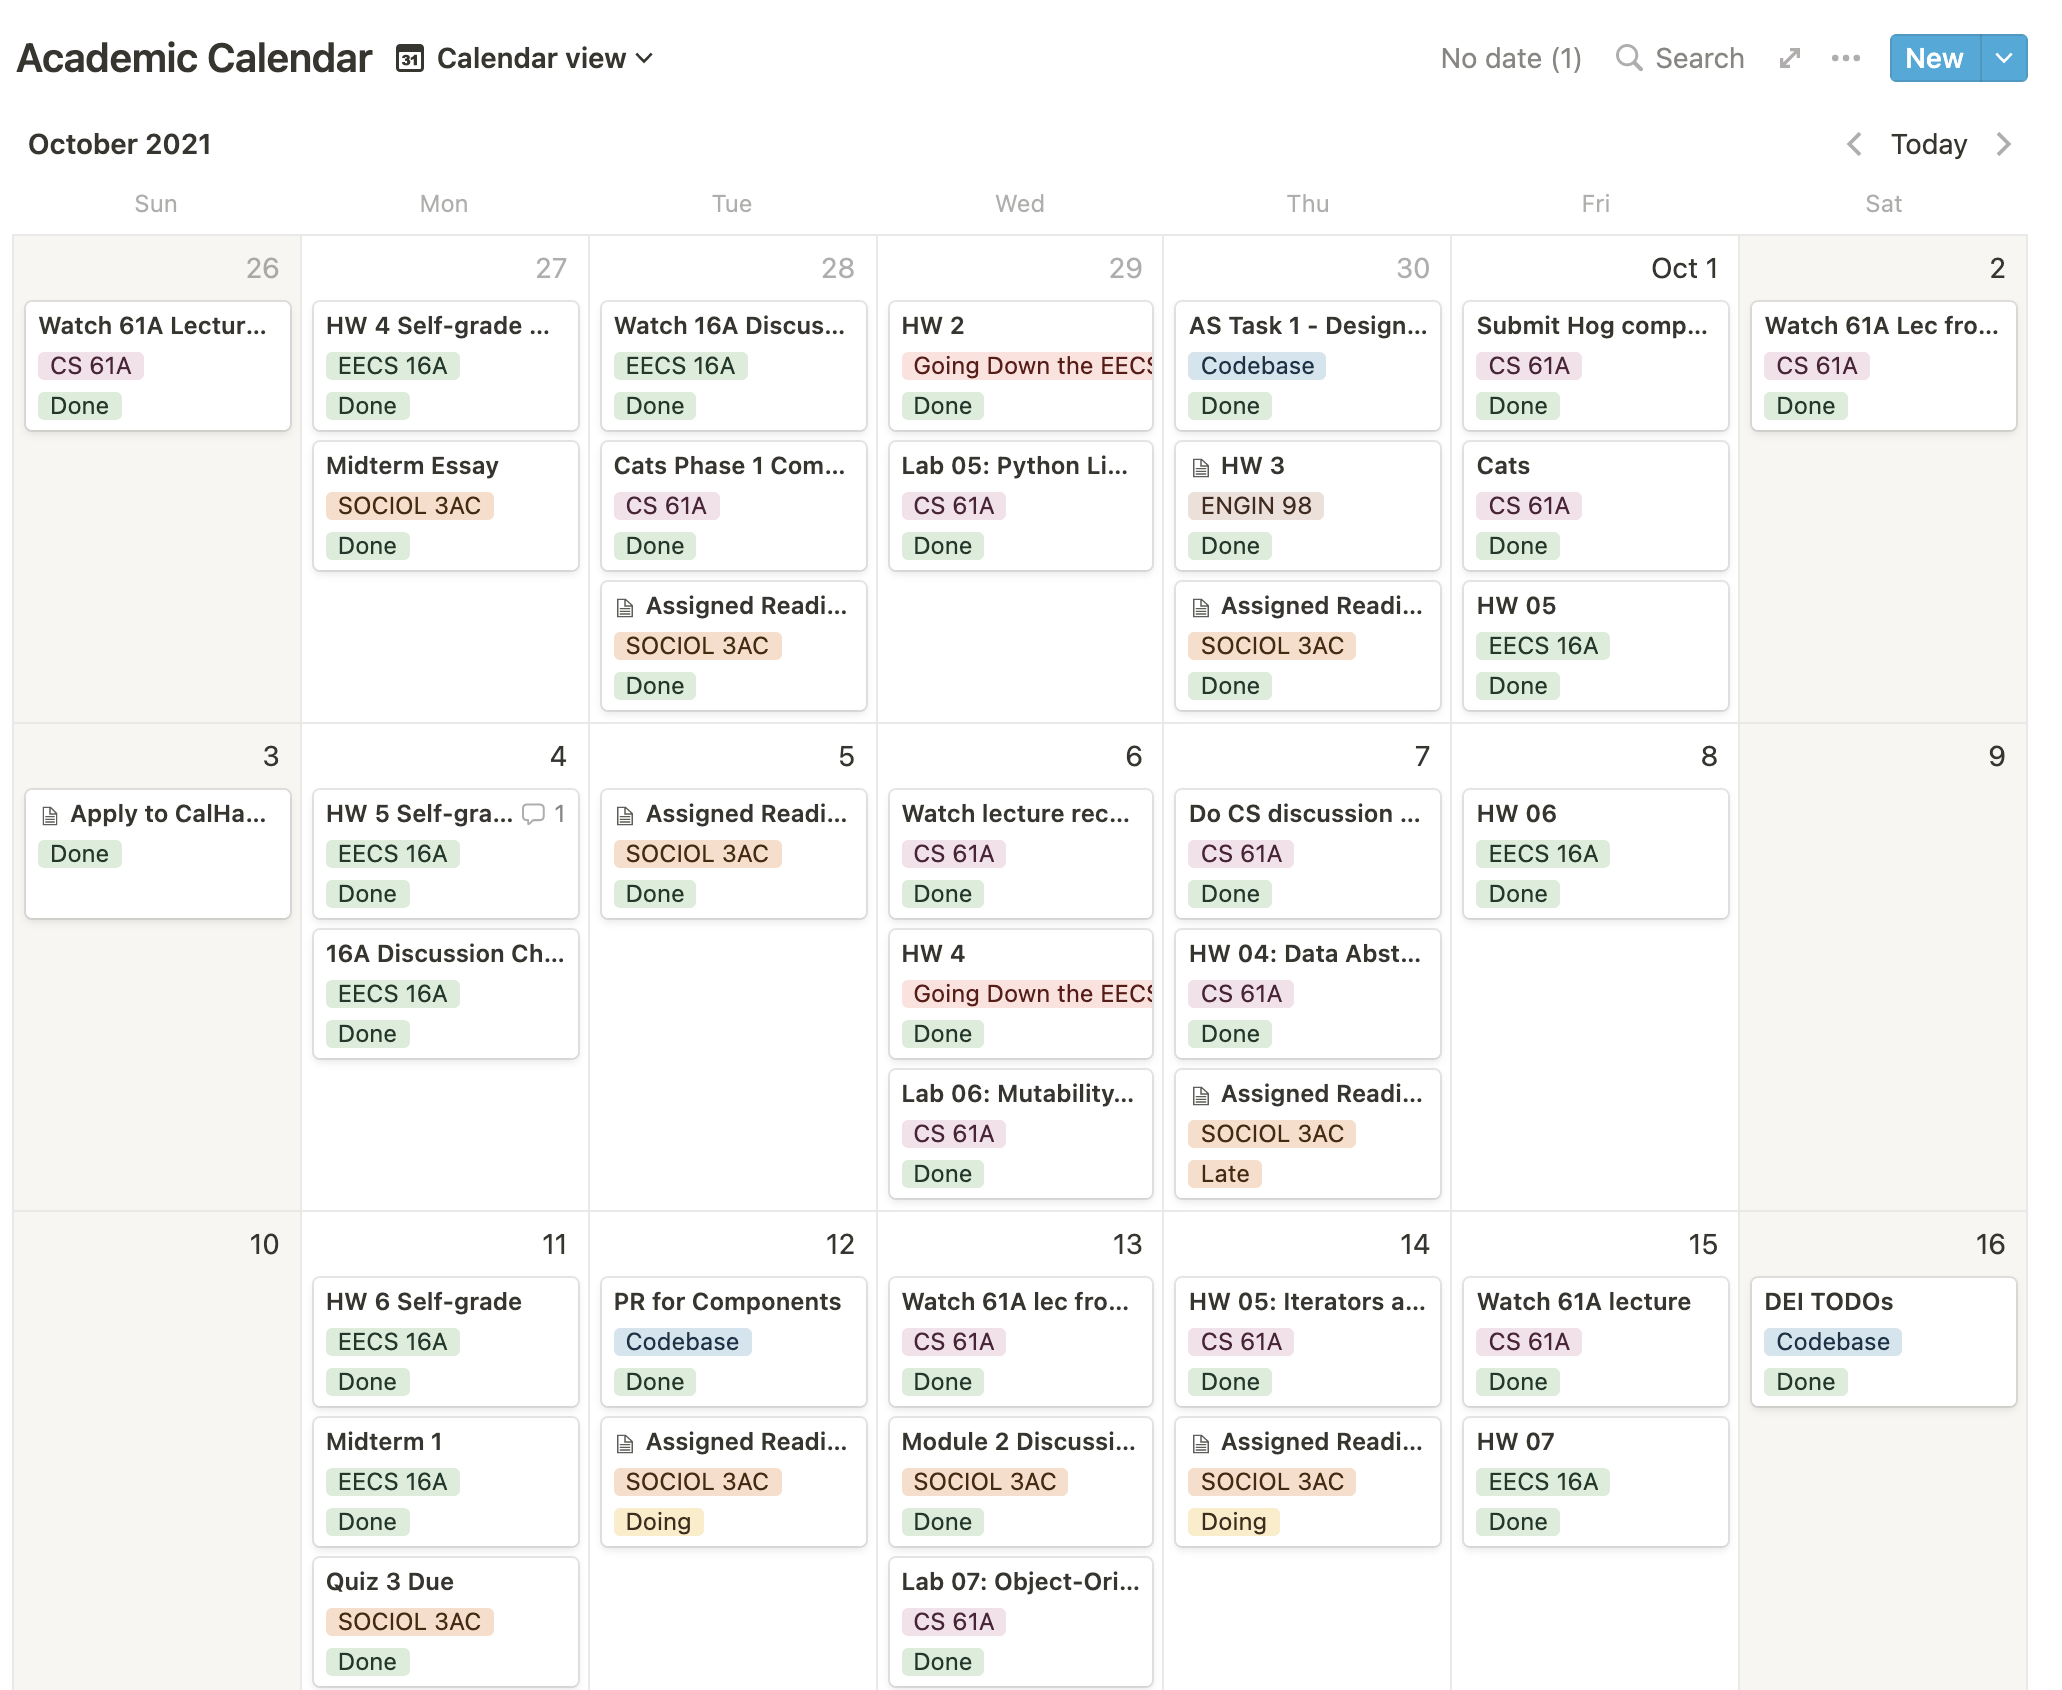 Notion Academic Calendar page in Calendar view, showing cards on each day of the month when I had assignments due. The cards represented each assignment